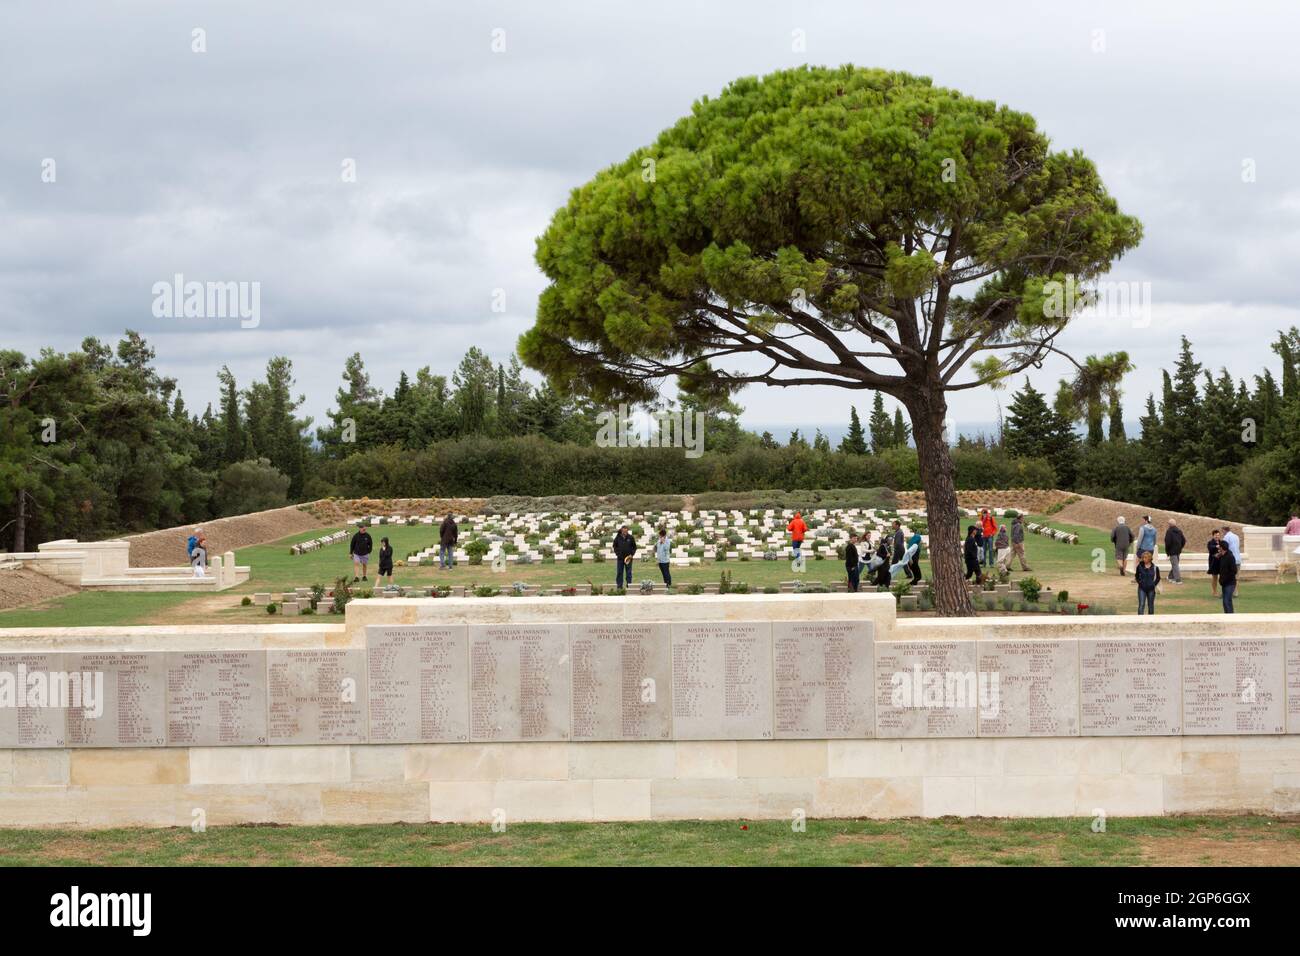 The Lone Pine Cemetery and Monument honoring ANZAC soldiers from the World War I campaign at Gallipoli, Turkey. Stock Photo